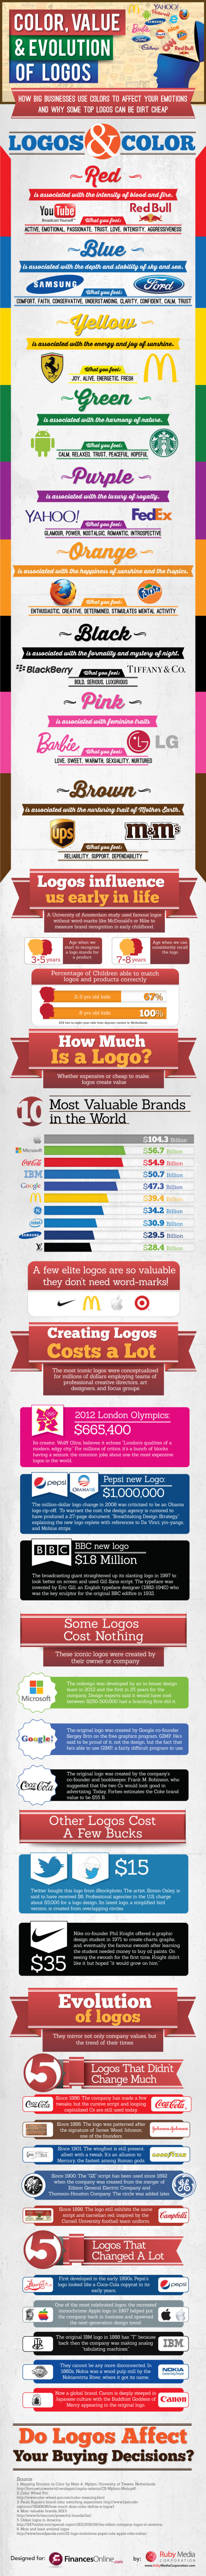 Color, Value, and Evolution of Logos infographic